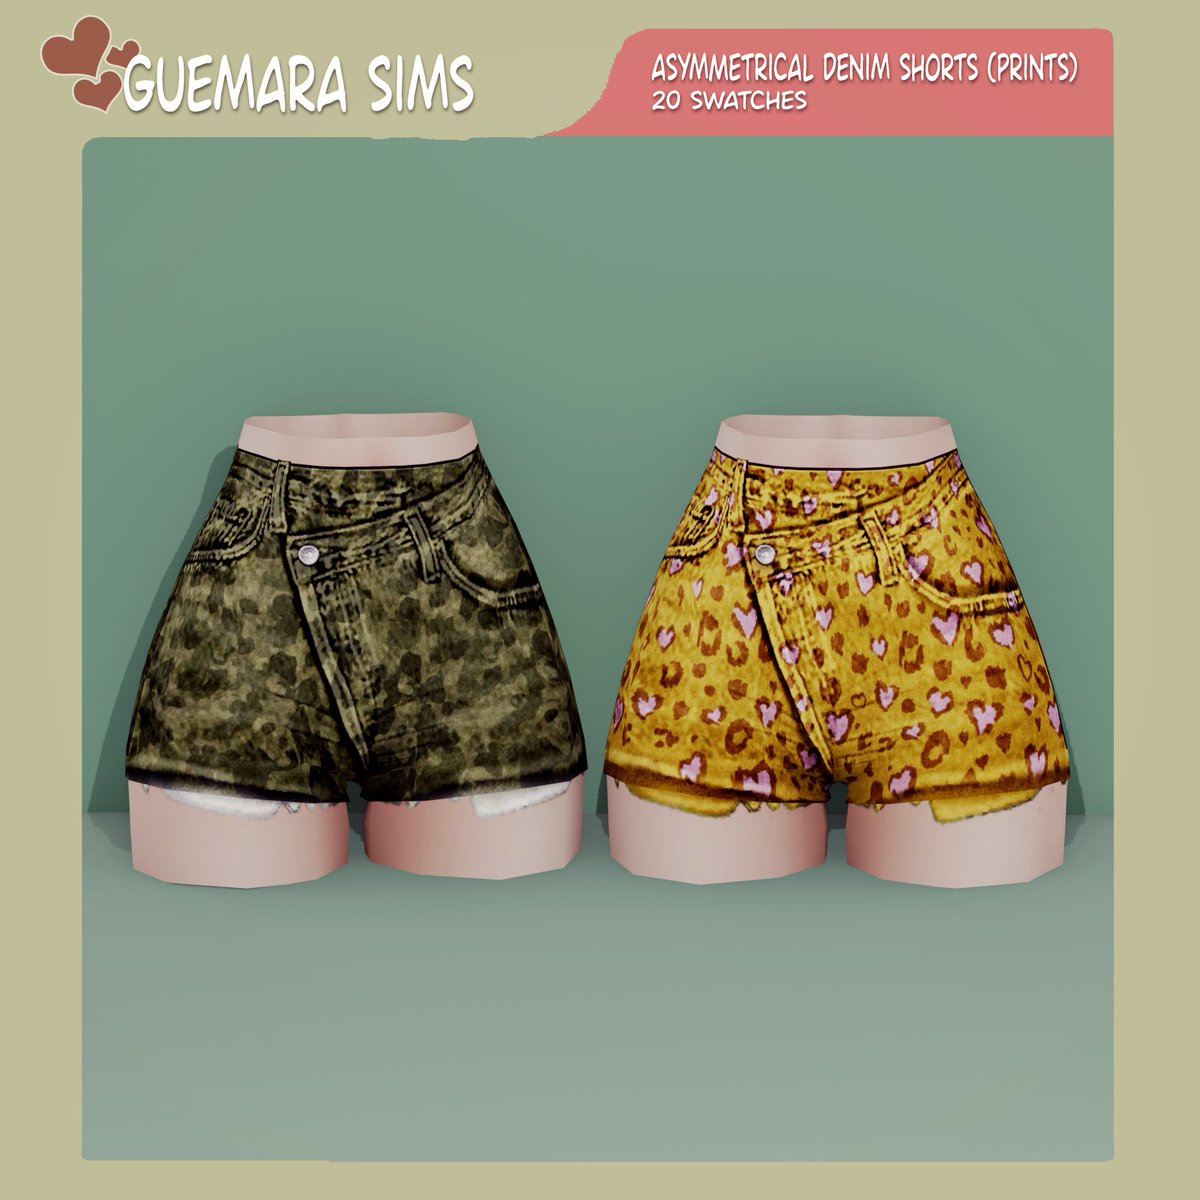 Elevate your Sims' style with my Asymmetrical Denim Shorts!
More info: patreon.com/posts/84301220

#Sims4 #TheSims4 #thesims4cc #sims4ccfinds #Sims4Cc #ShowUsYourSims #sims4customcontent #Sims4Clothing